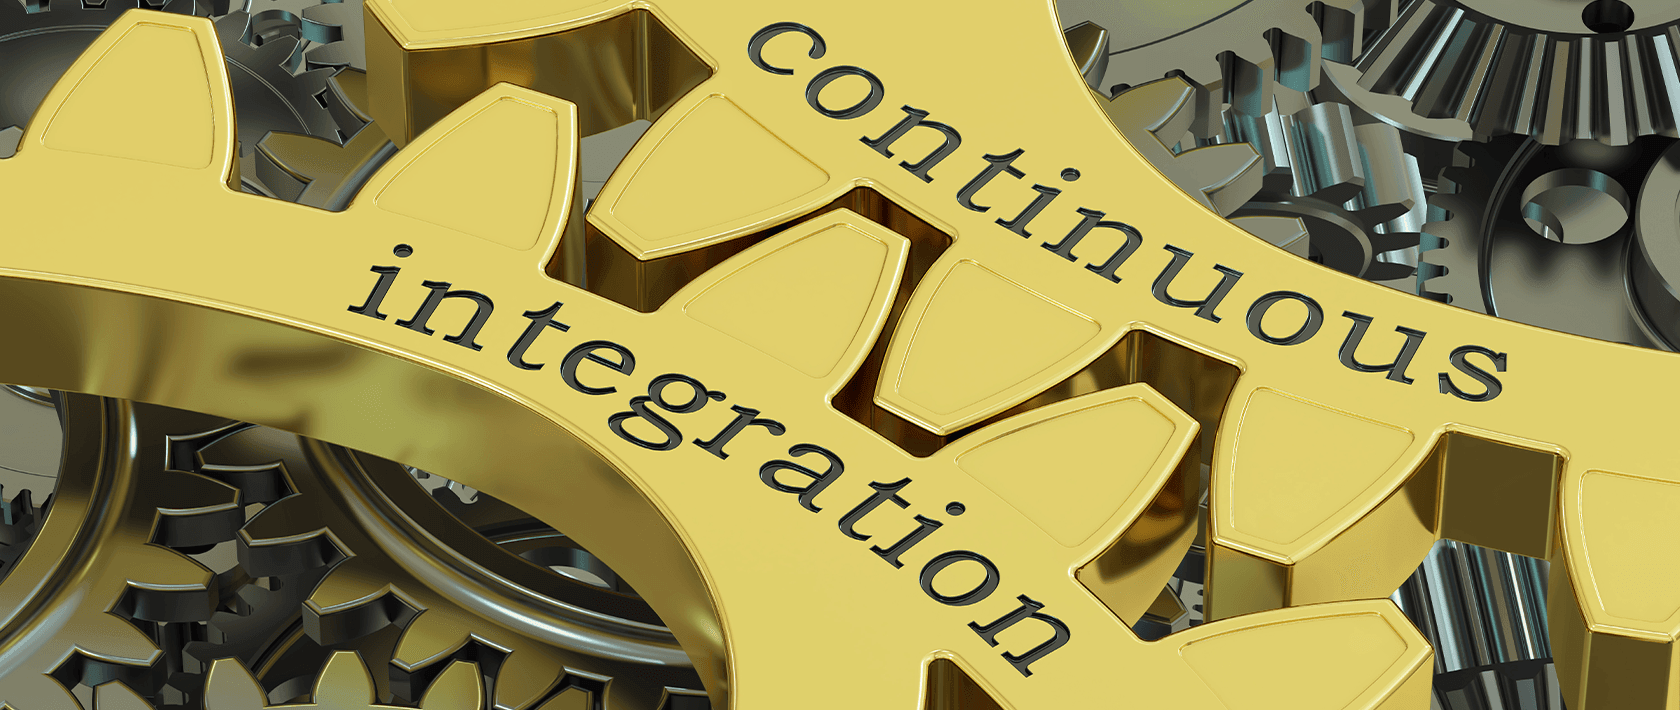 Are You Mastering Continuous Integration?